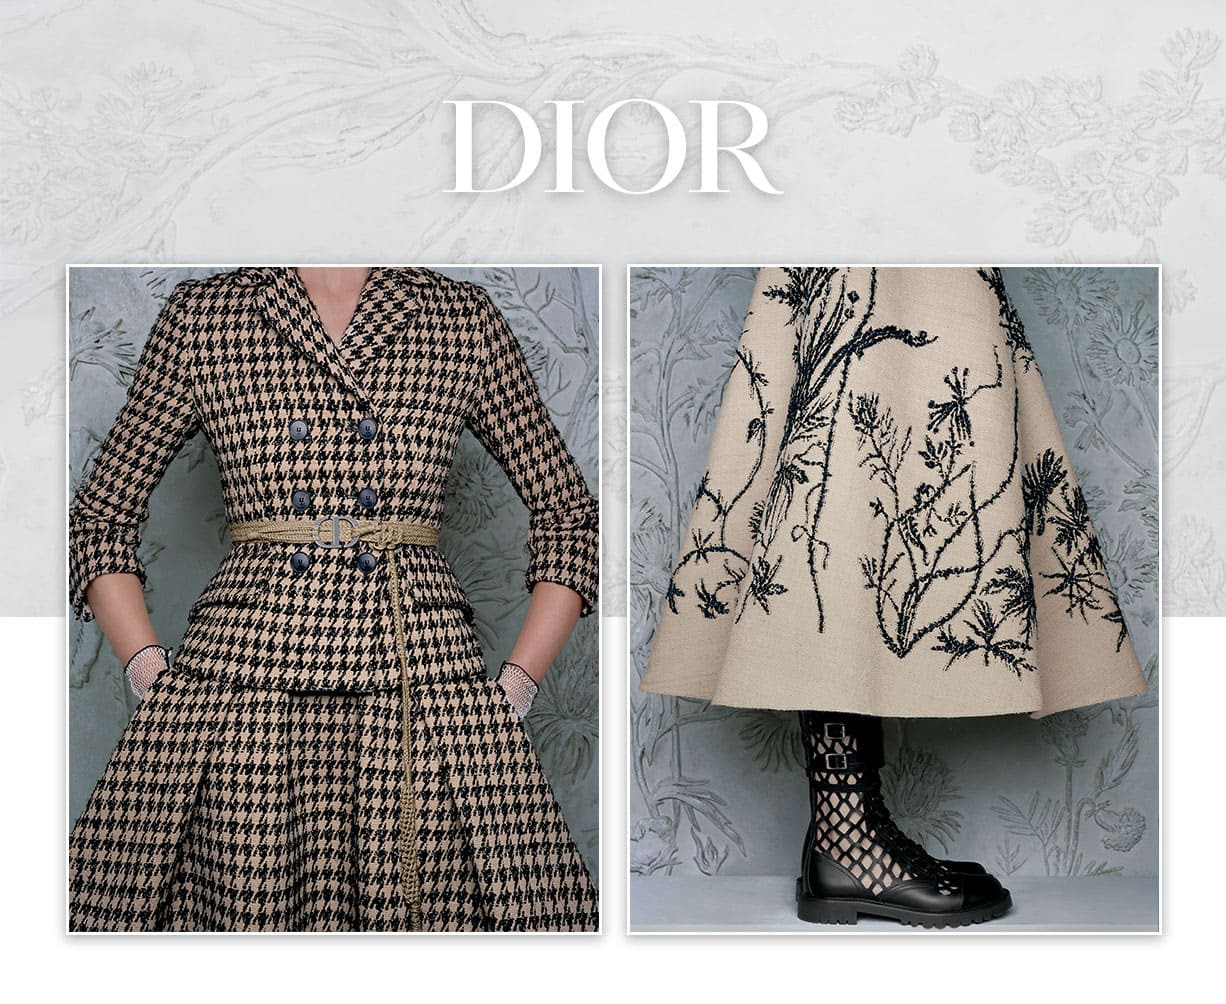 DIOR - Discover the new collection!